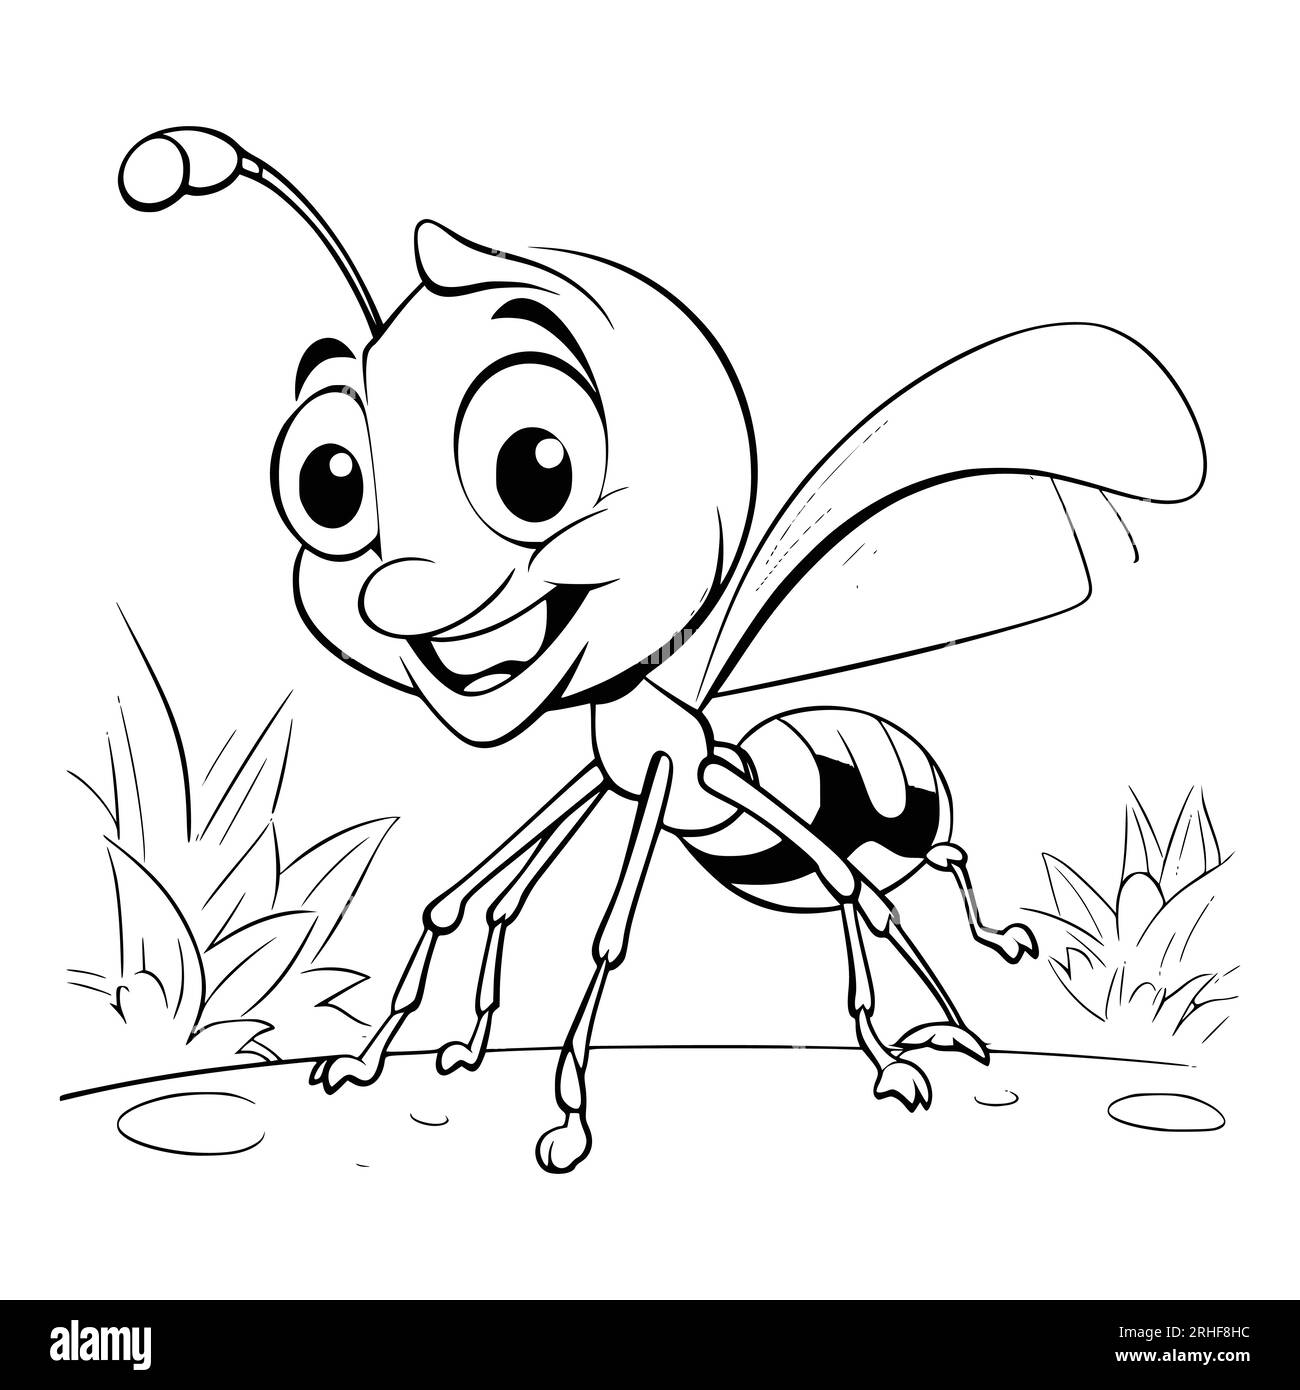 Ant Coloring Page Drawing For Kids Stock Vector